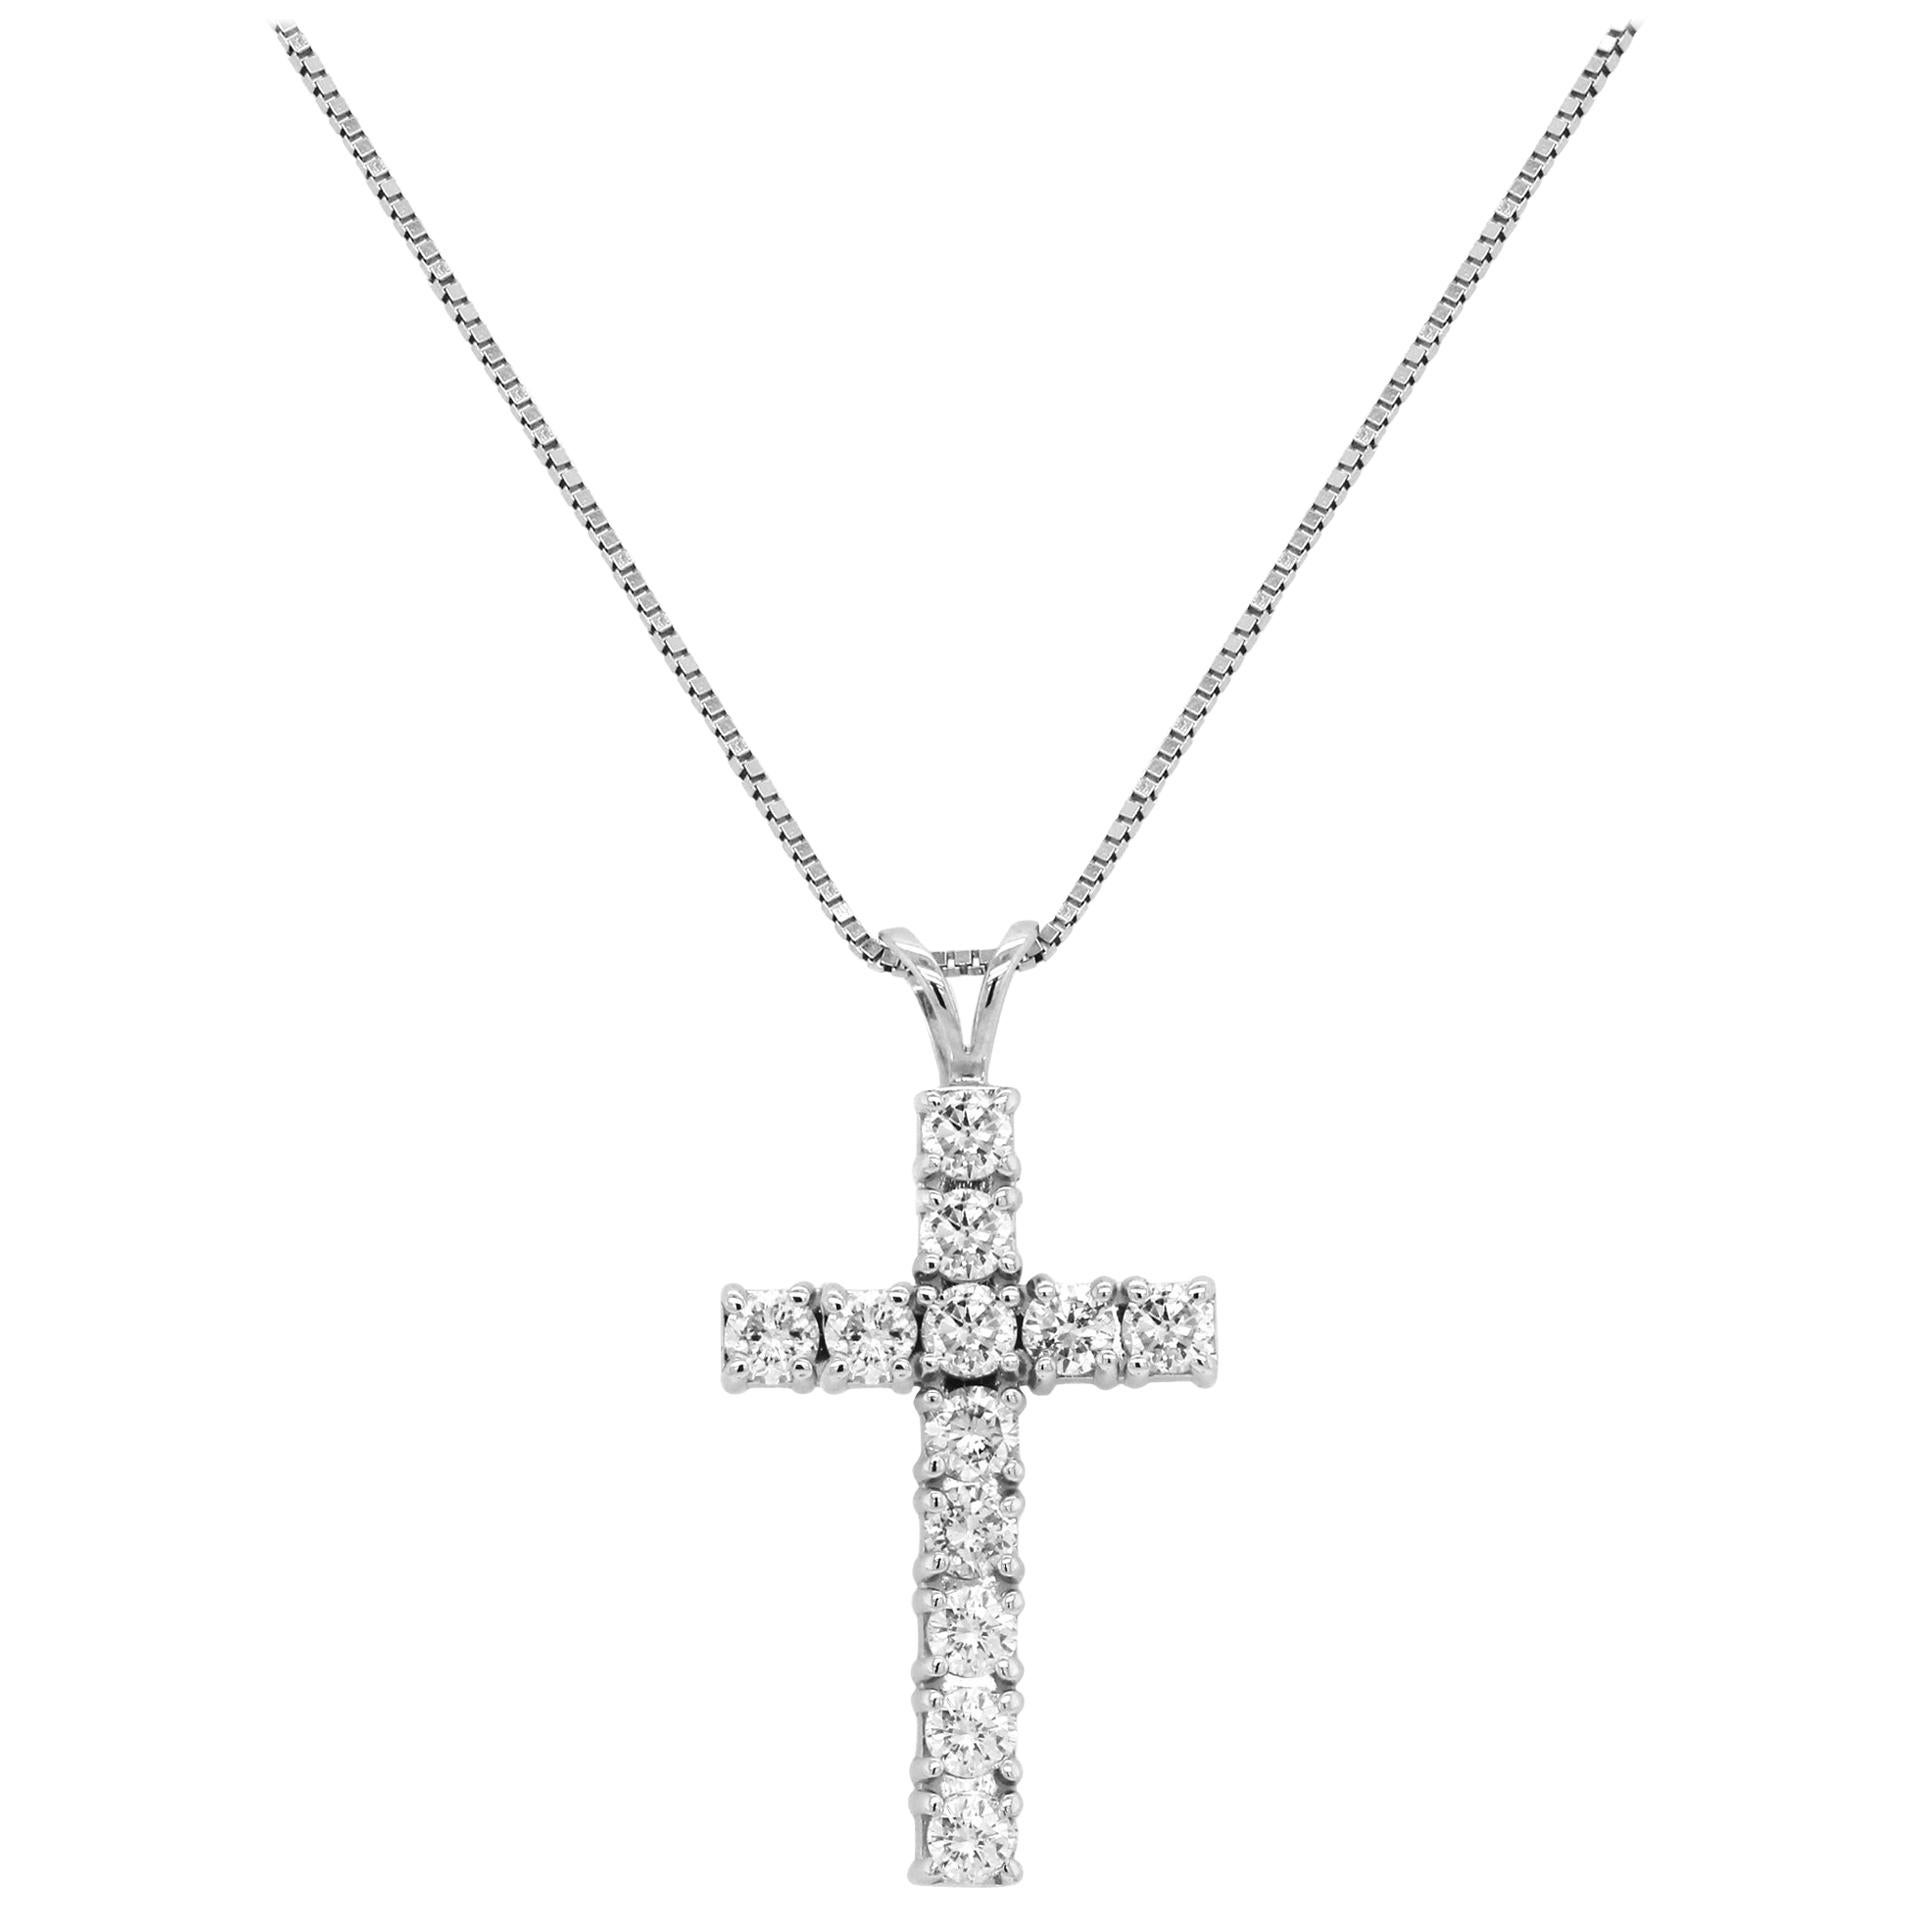 White Gold and Diamond Cross Pendant Chain Necklace